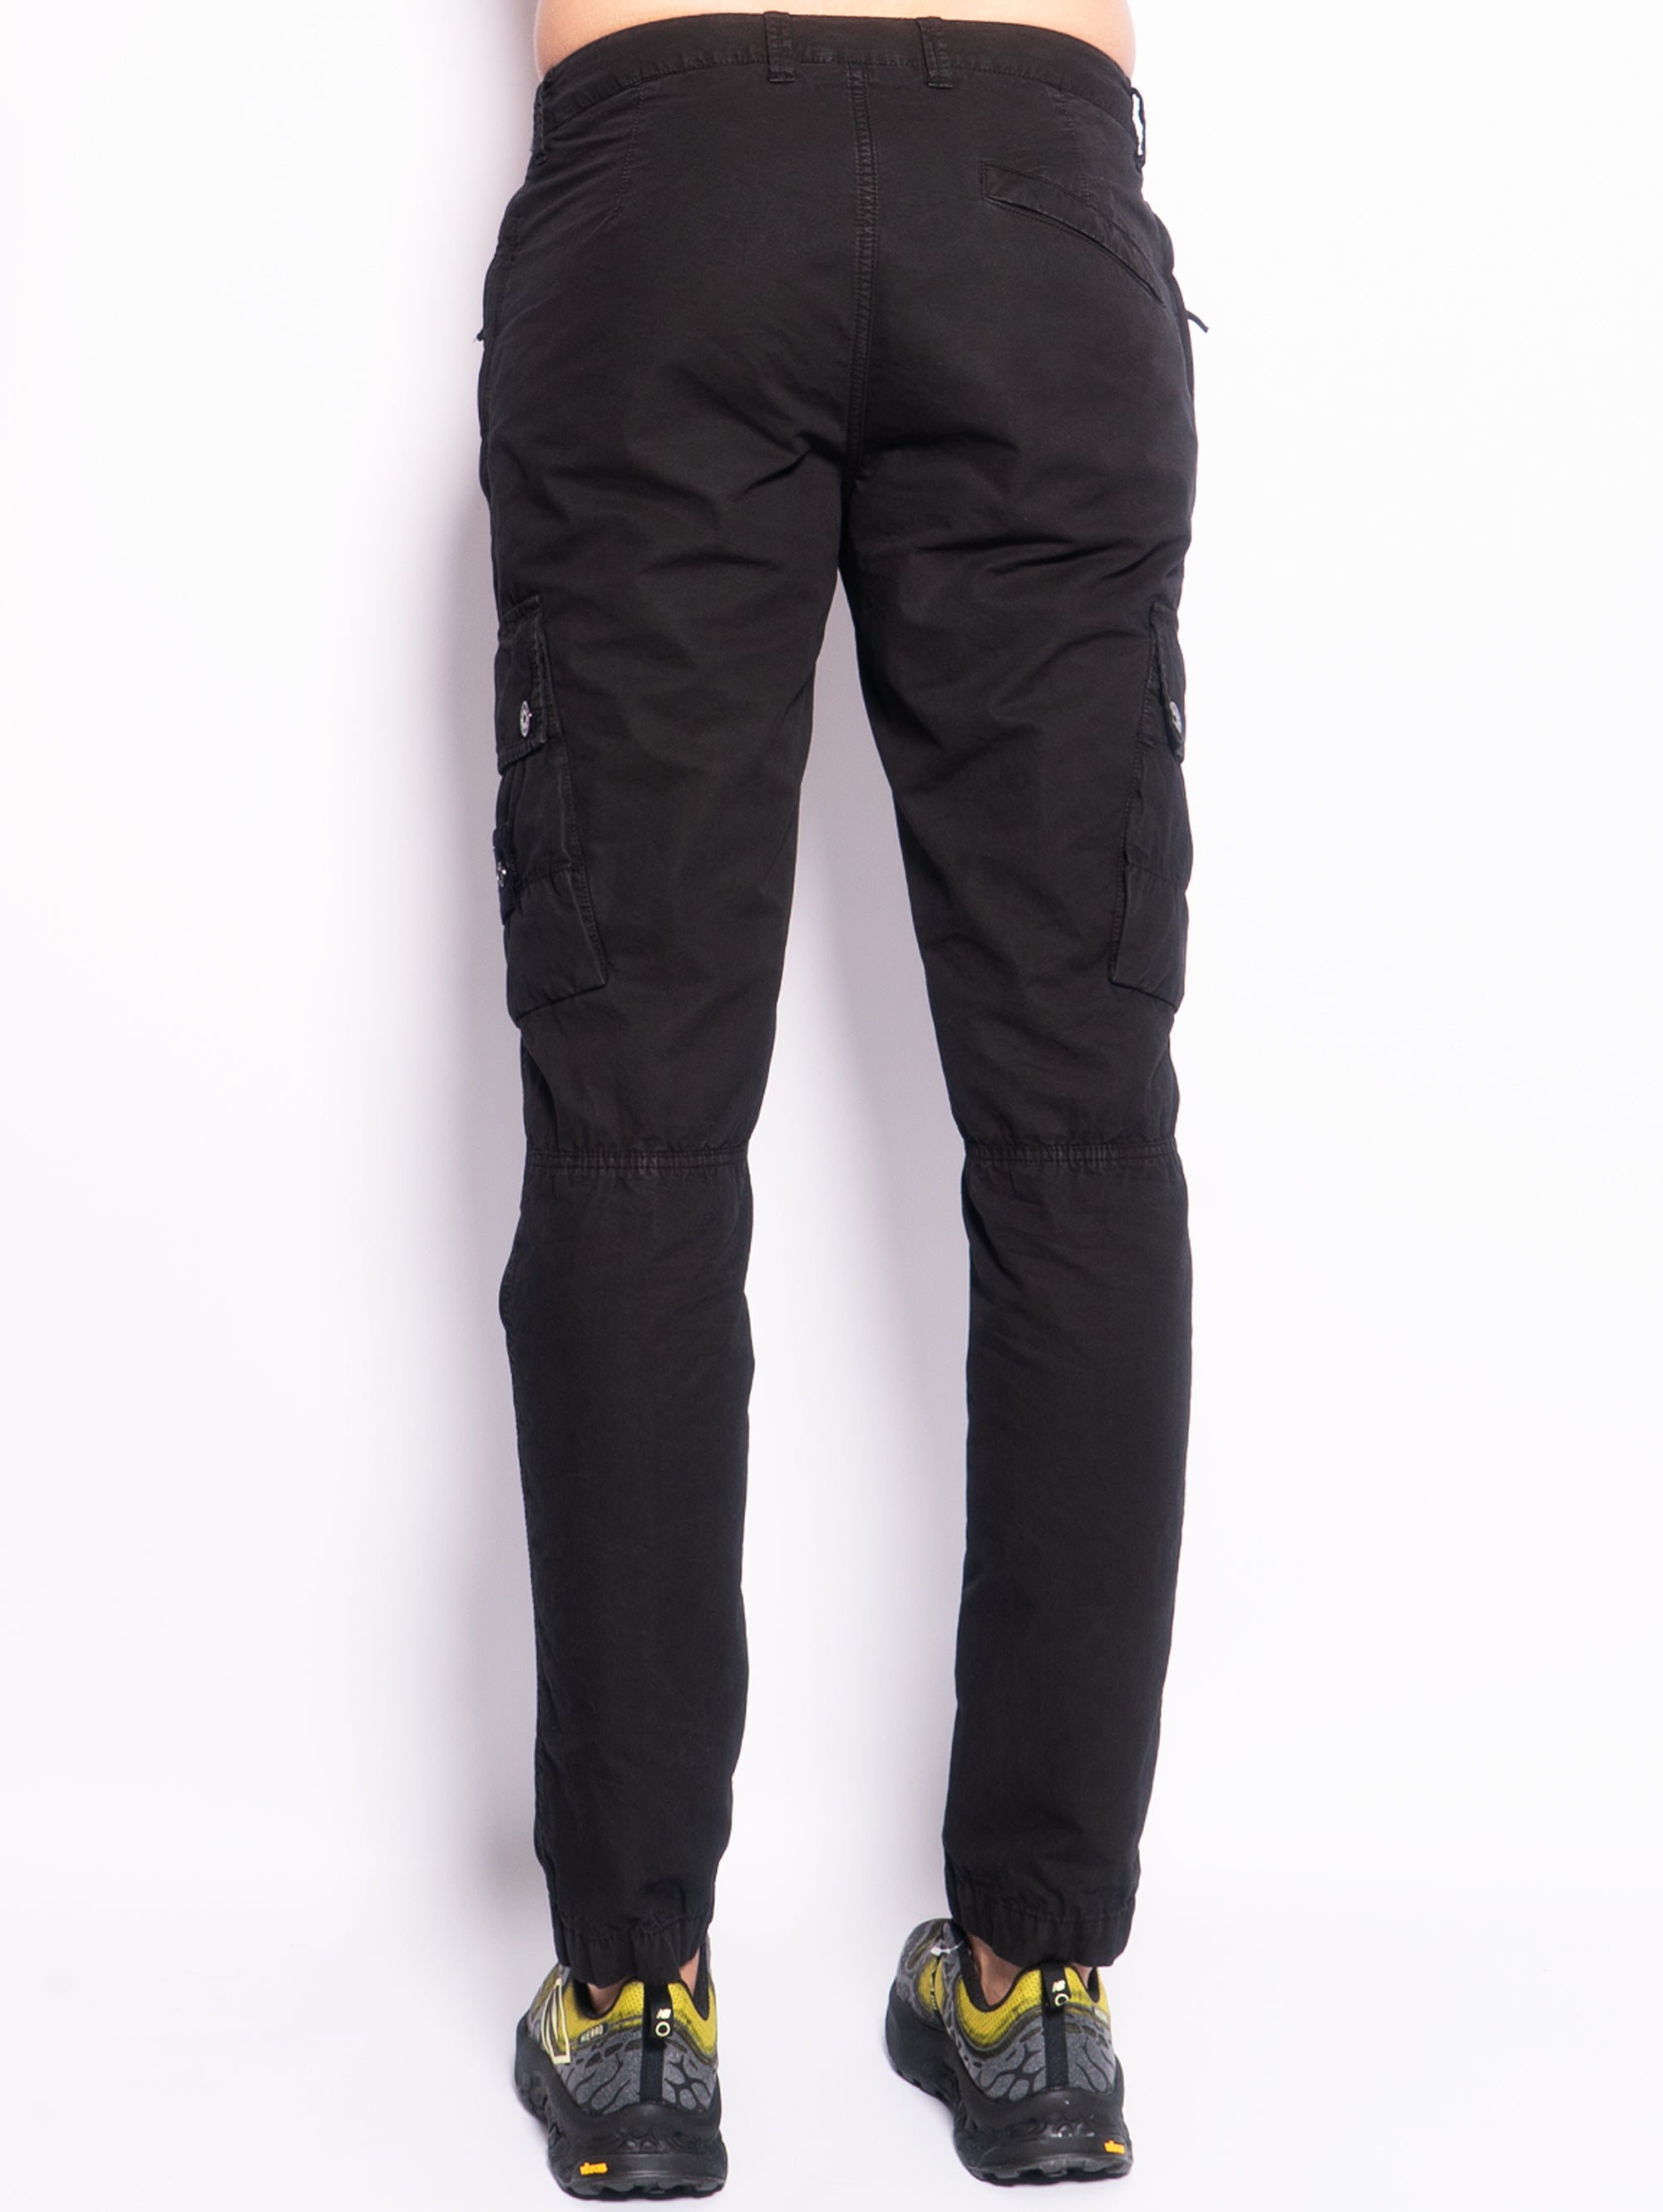 Black Garment Dyed Cargo Trousers